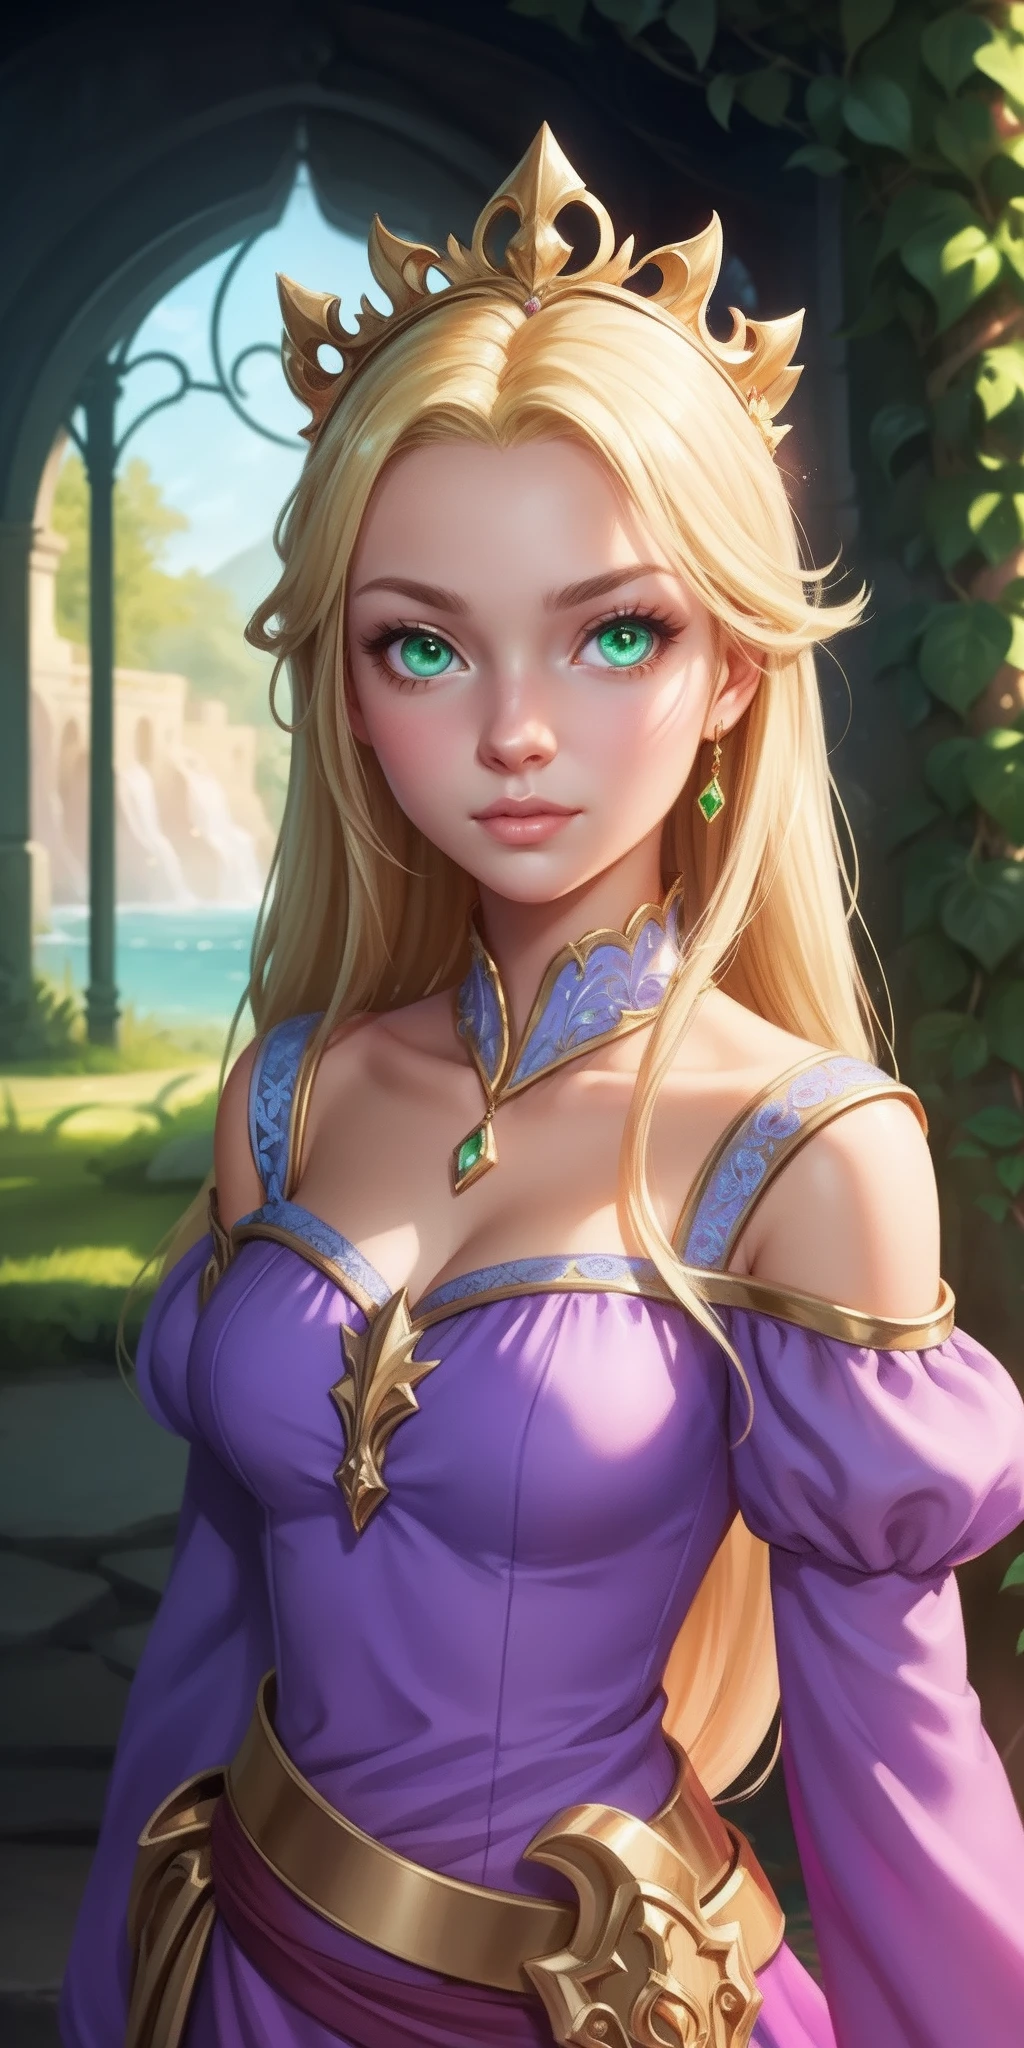 Flower Princess, Rapunzel, Beautiful, Glowing yellow glow, Long blonde hair, Green eyes, Lilac dress, Green ivy, Nice young face, Soft tan skin,Art germ,  Fantastical, intricately details, Splash screen, Complementary colors, fantasy concept art,